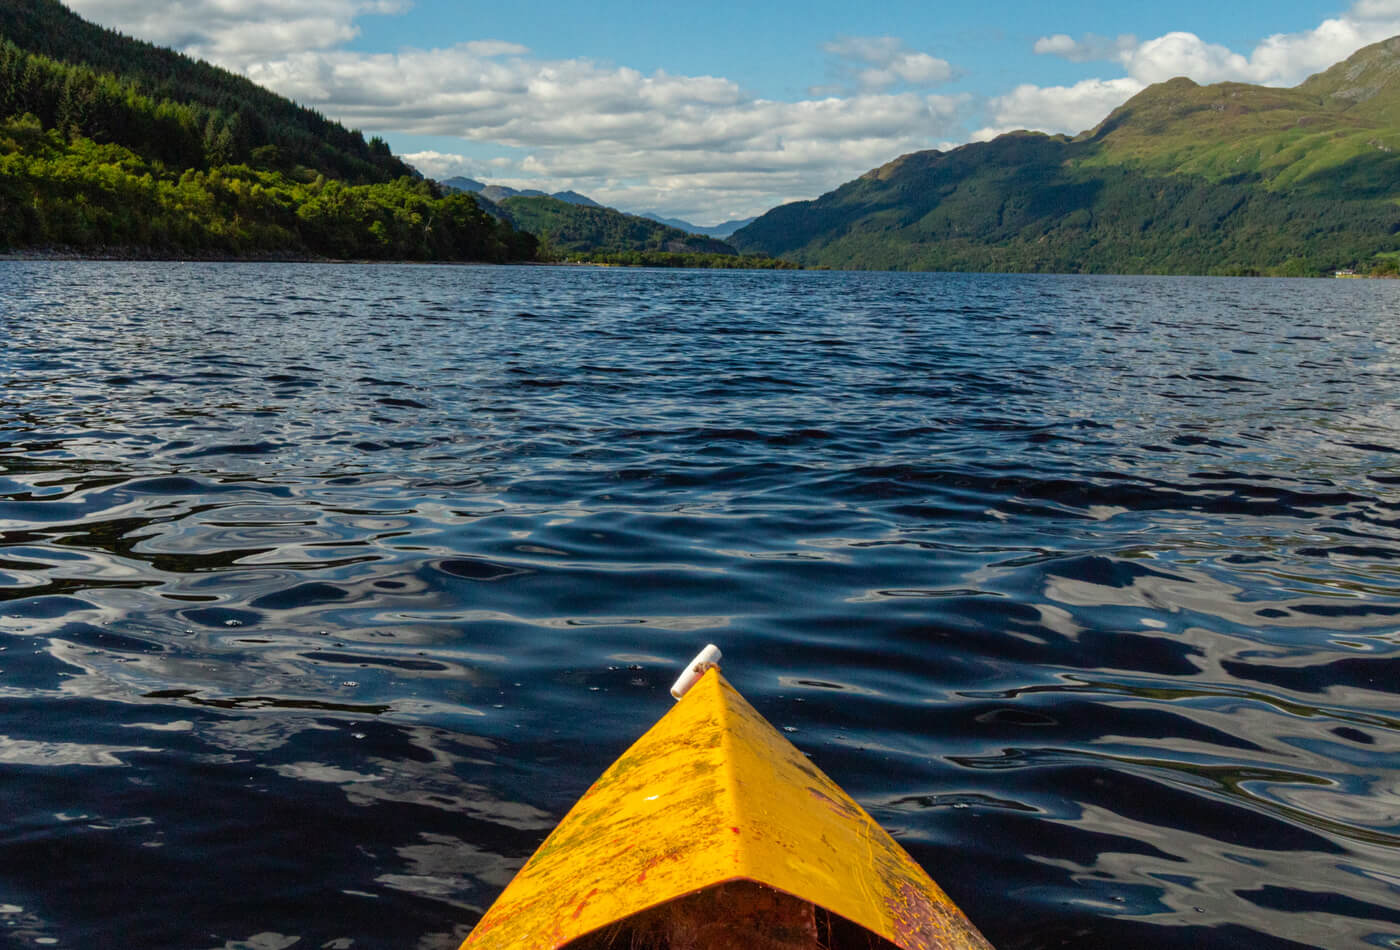 A yellow kayak sat on the water in Loch Lomond